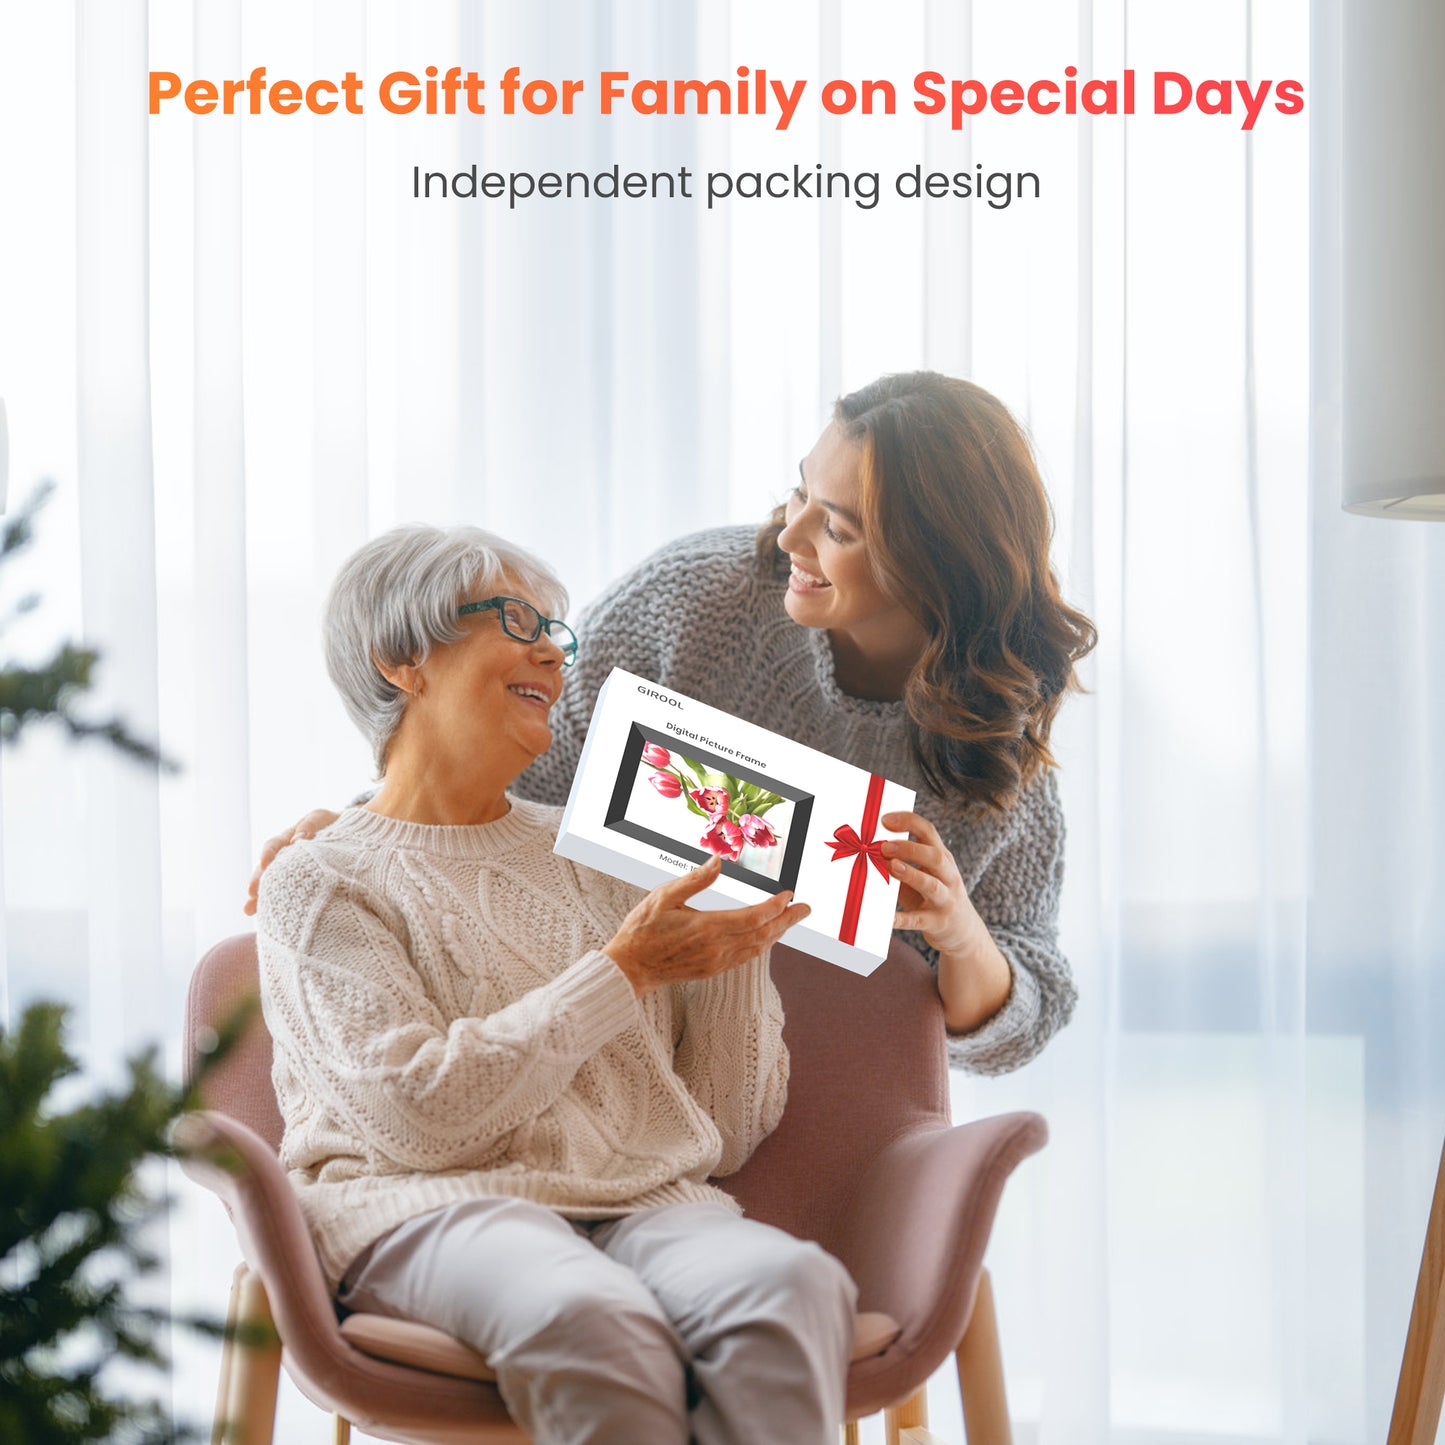 GIROOL 10.1" WiFi Digital Picture Frame 2 Pack, 32GB Storage Smart Touch Screen Photo Frame, HD Electric Picture Frame, Auto-Rotate or Wall Mountable,Send Photos and Videos via free App, Best Gift!